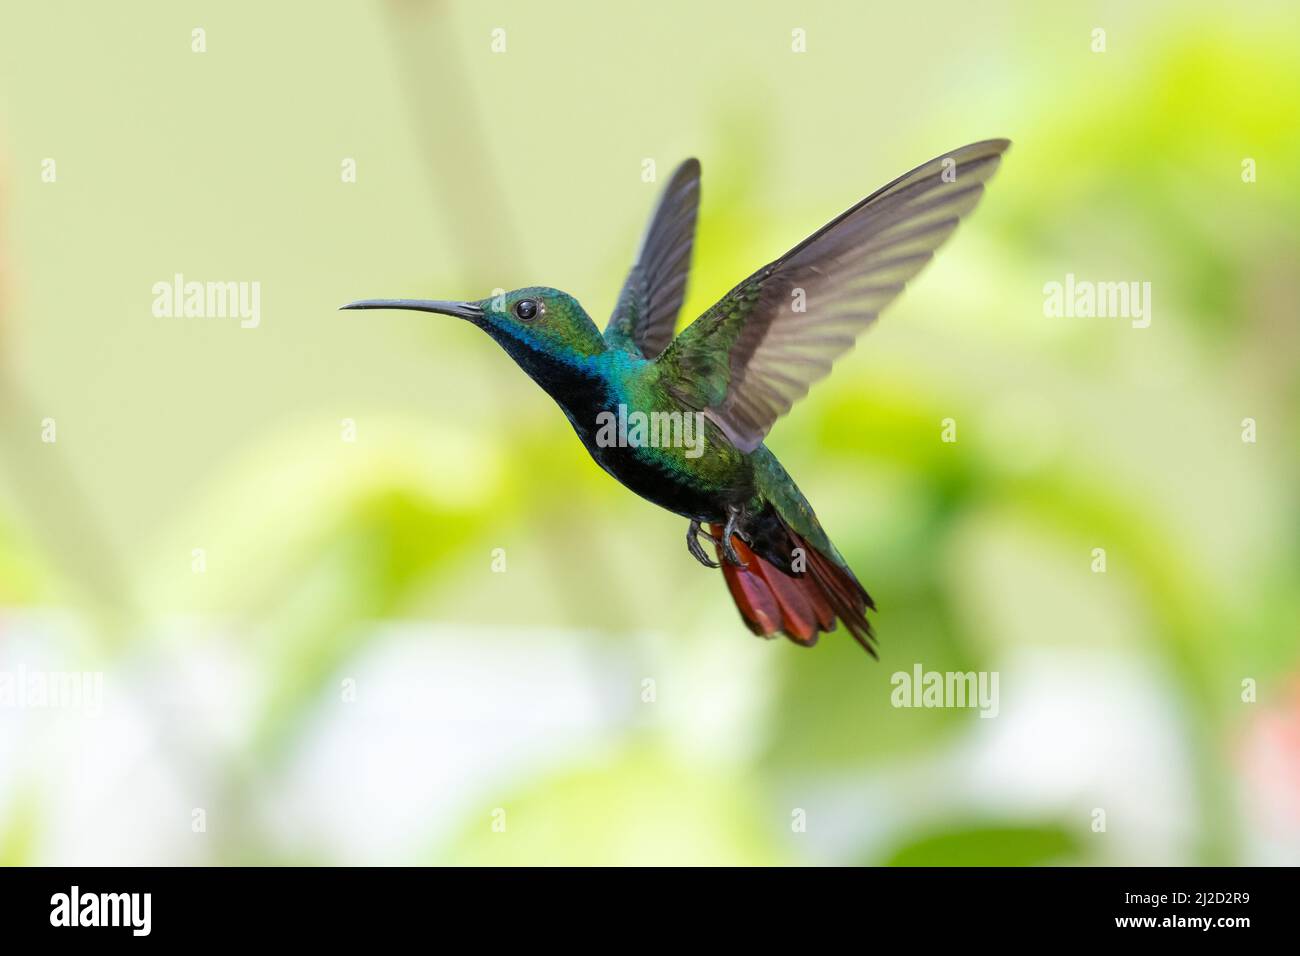 Stunning and vivid Black-throated Mango hummingbird, Anthracothorax nigricollis, hovering in a unique pose with a soft green background. Stock Photo